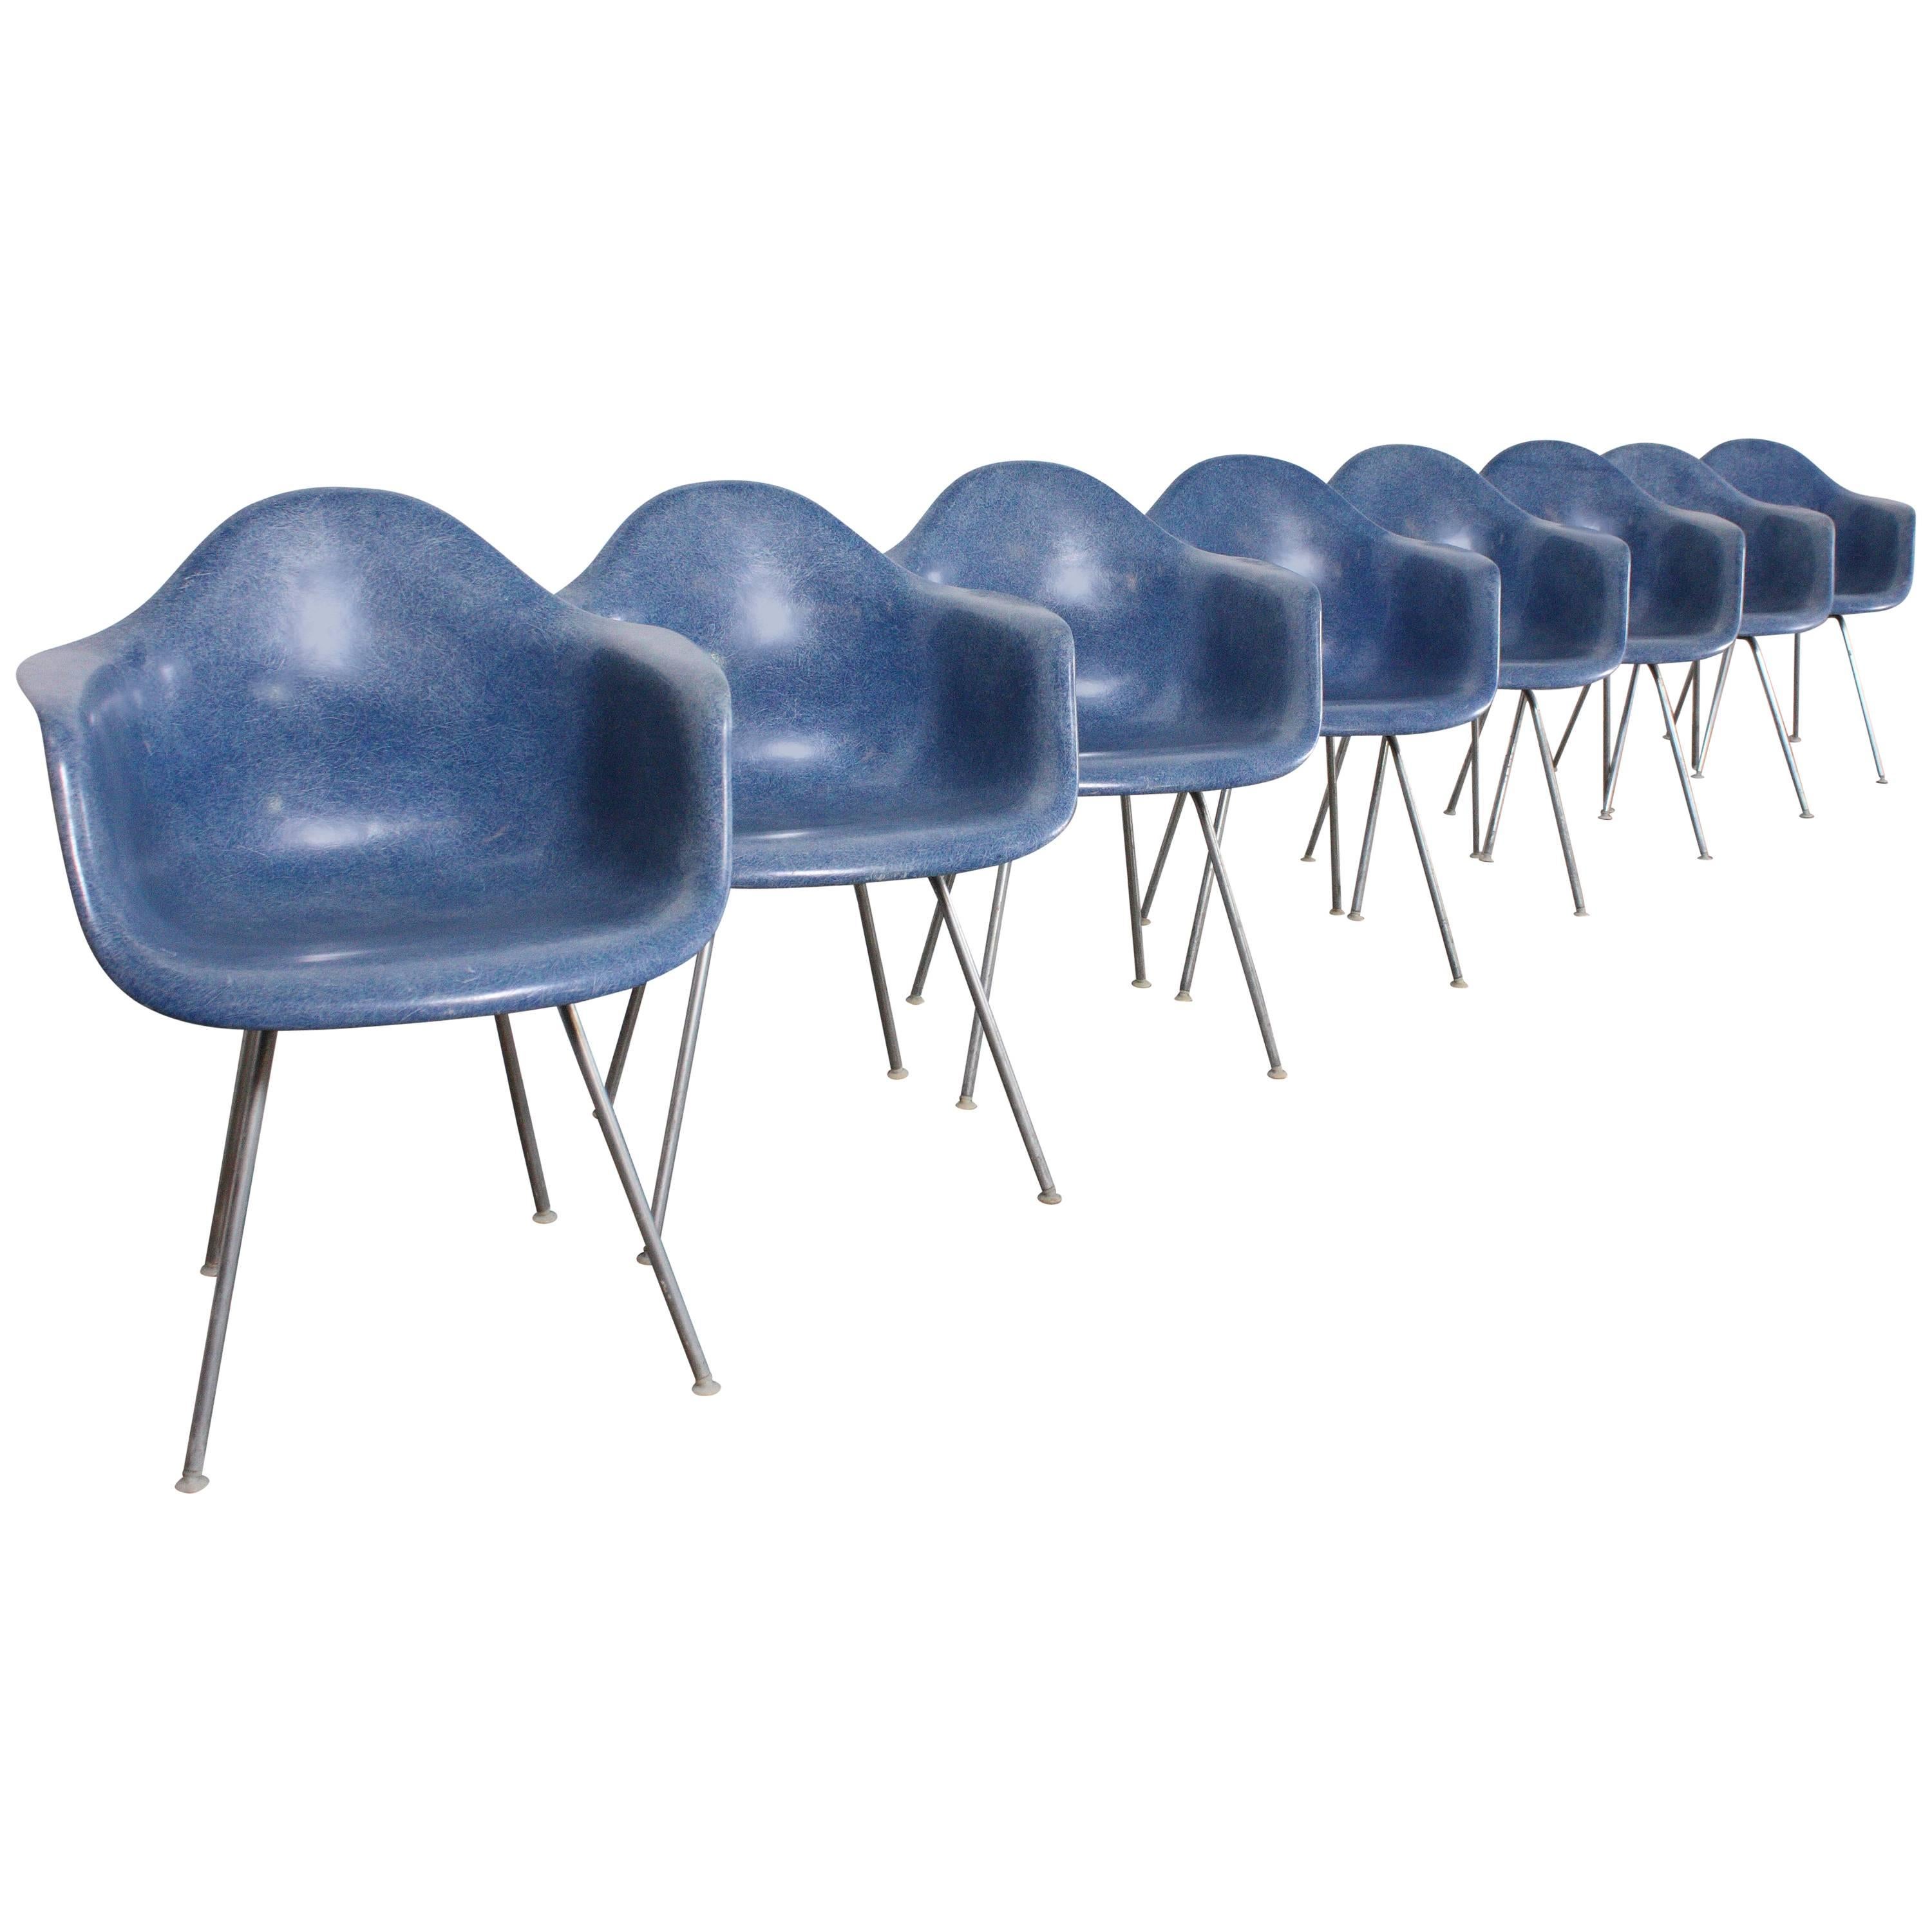 Rare Blue Fiberglass Shell Chairs by Charles Eames for Herman Miller